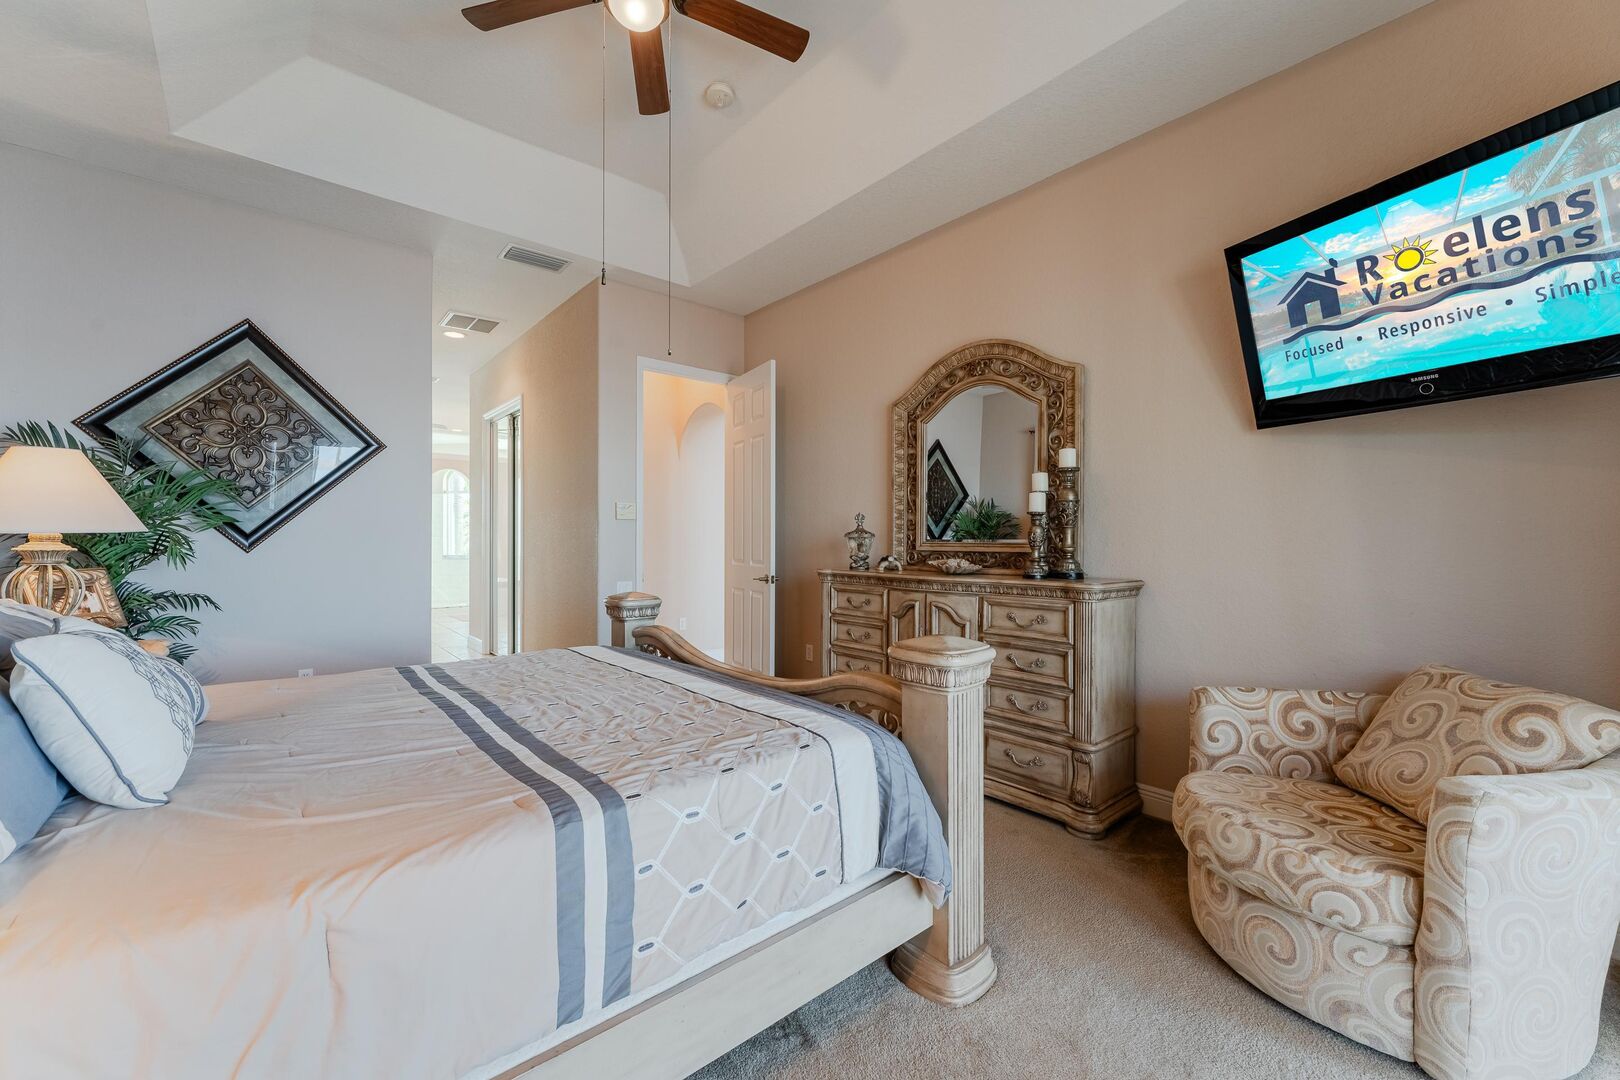 30. Master Bedroom with TV